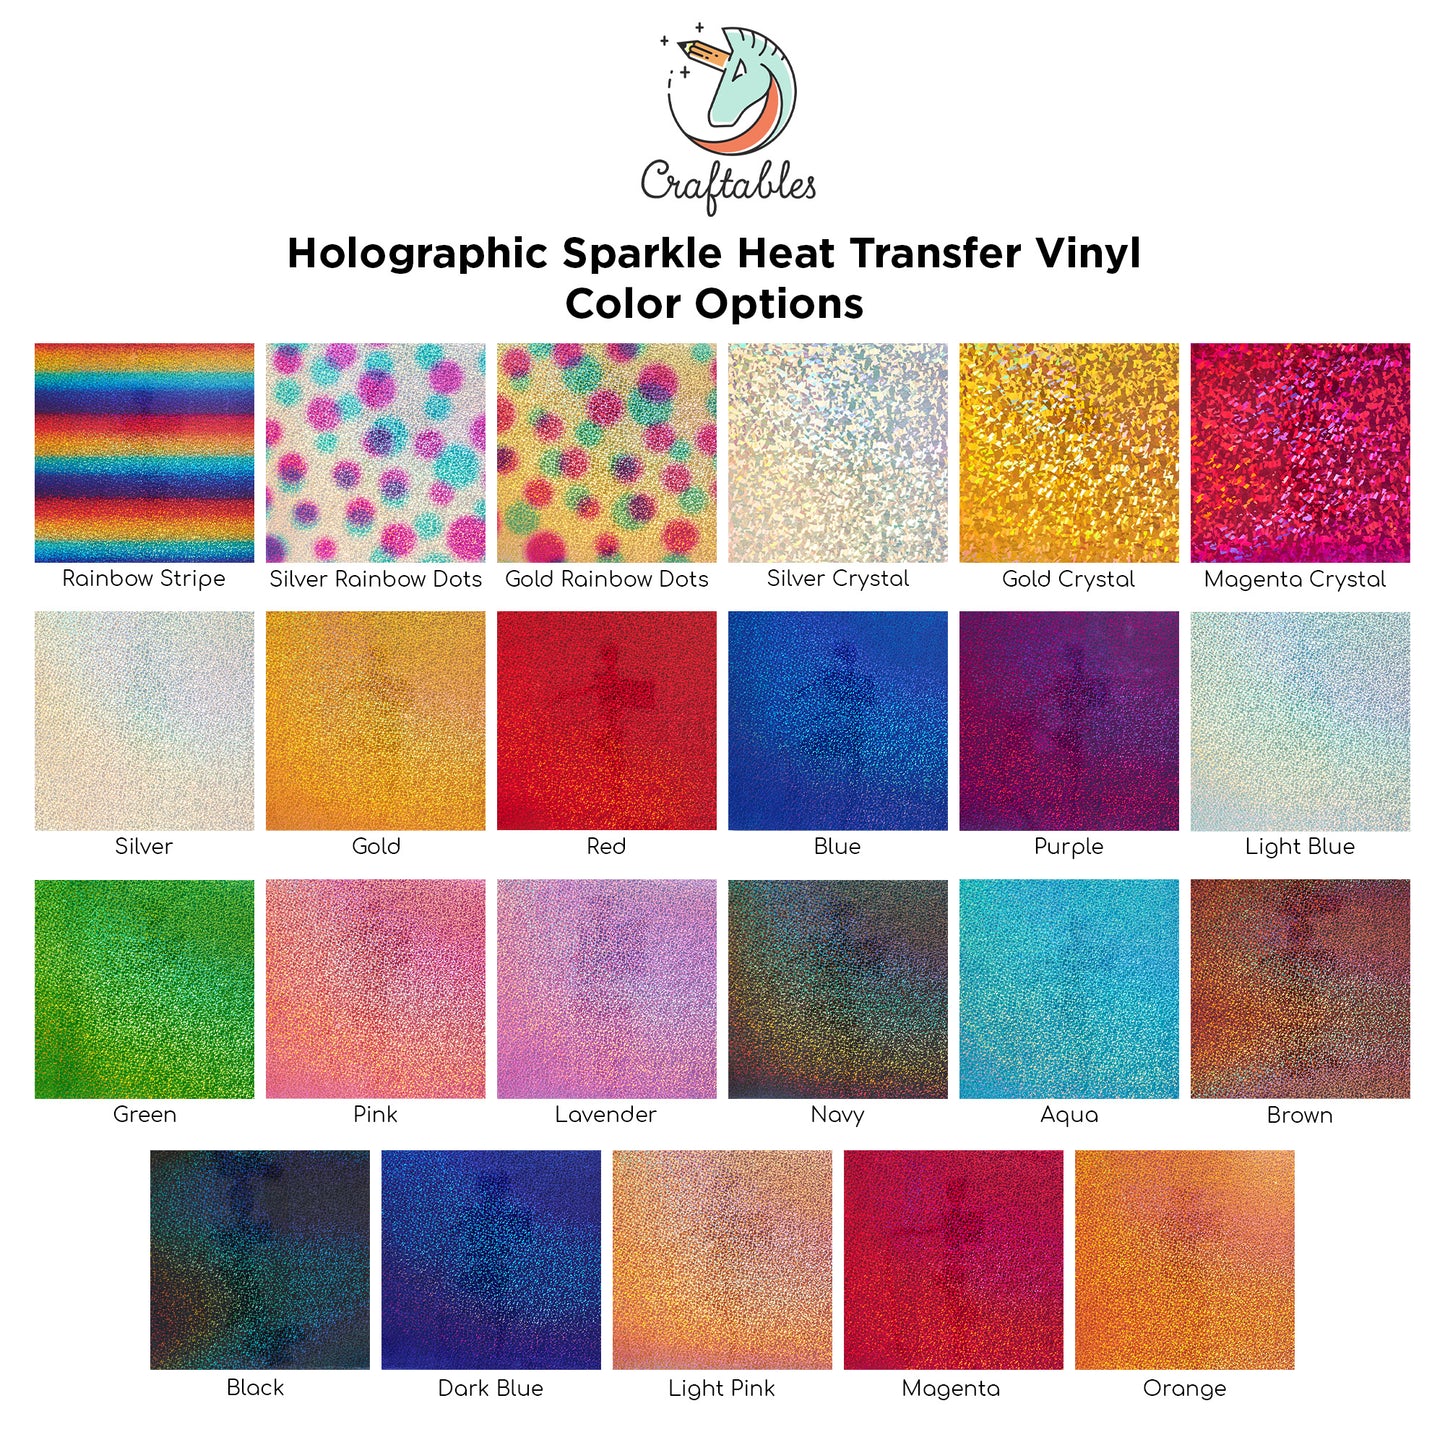 Light Pink Holographic Sparkle Heat Transfer Vinyl Sheets By Craftables